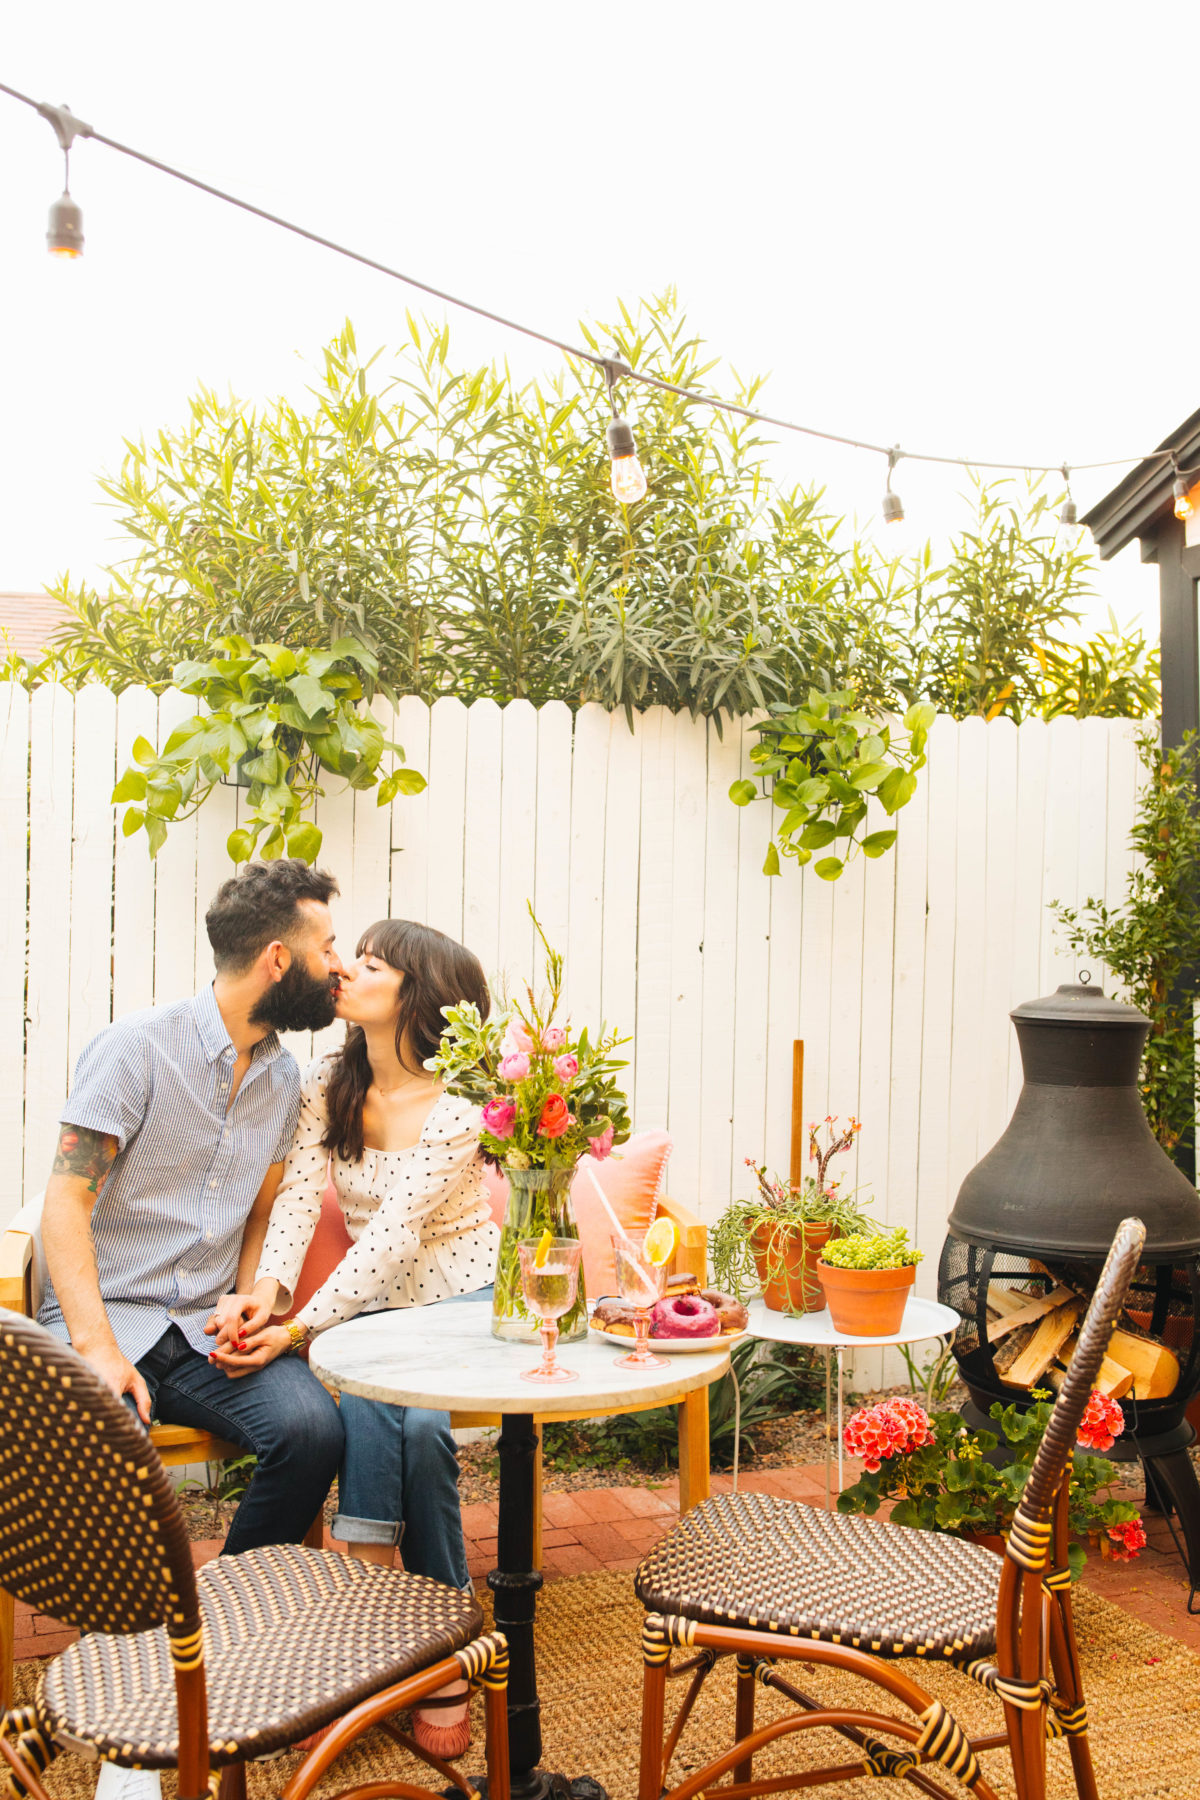 Our Parisian Backyard Makeover with eBay